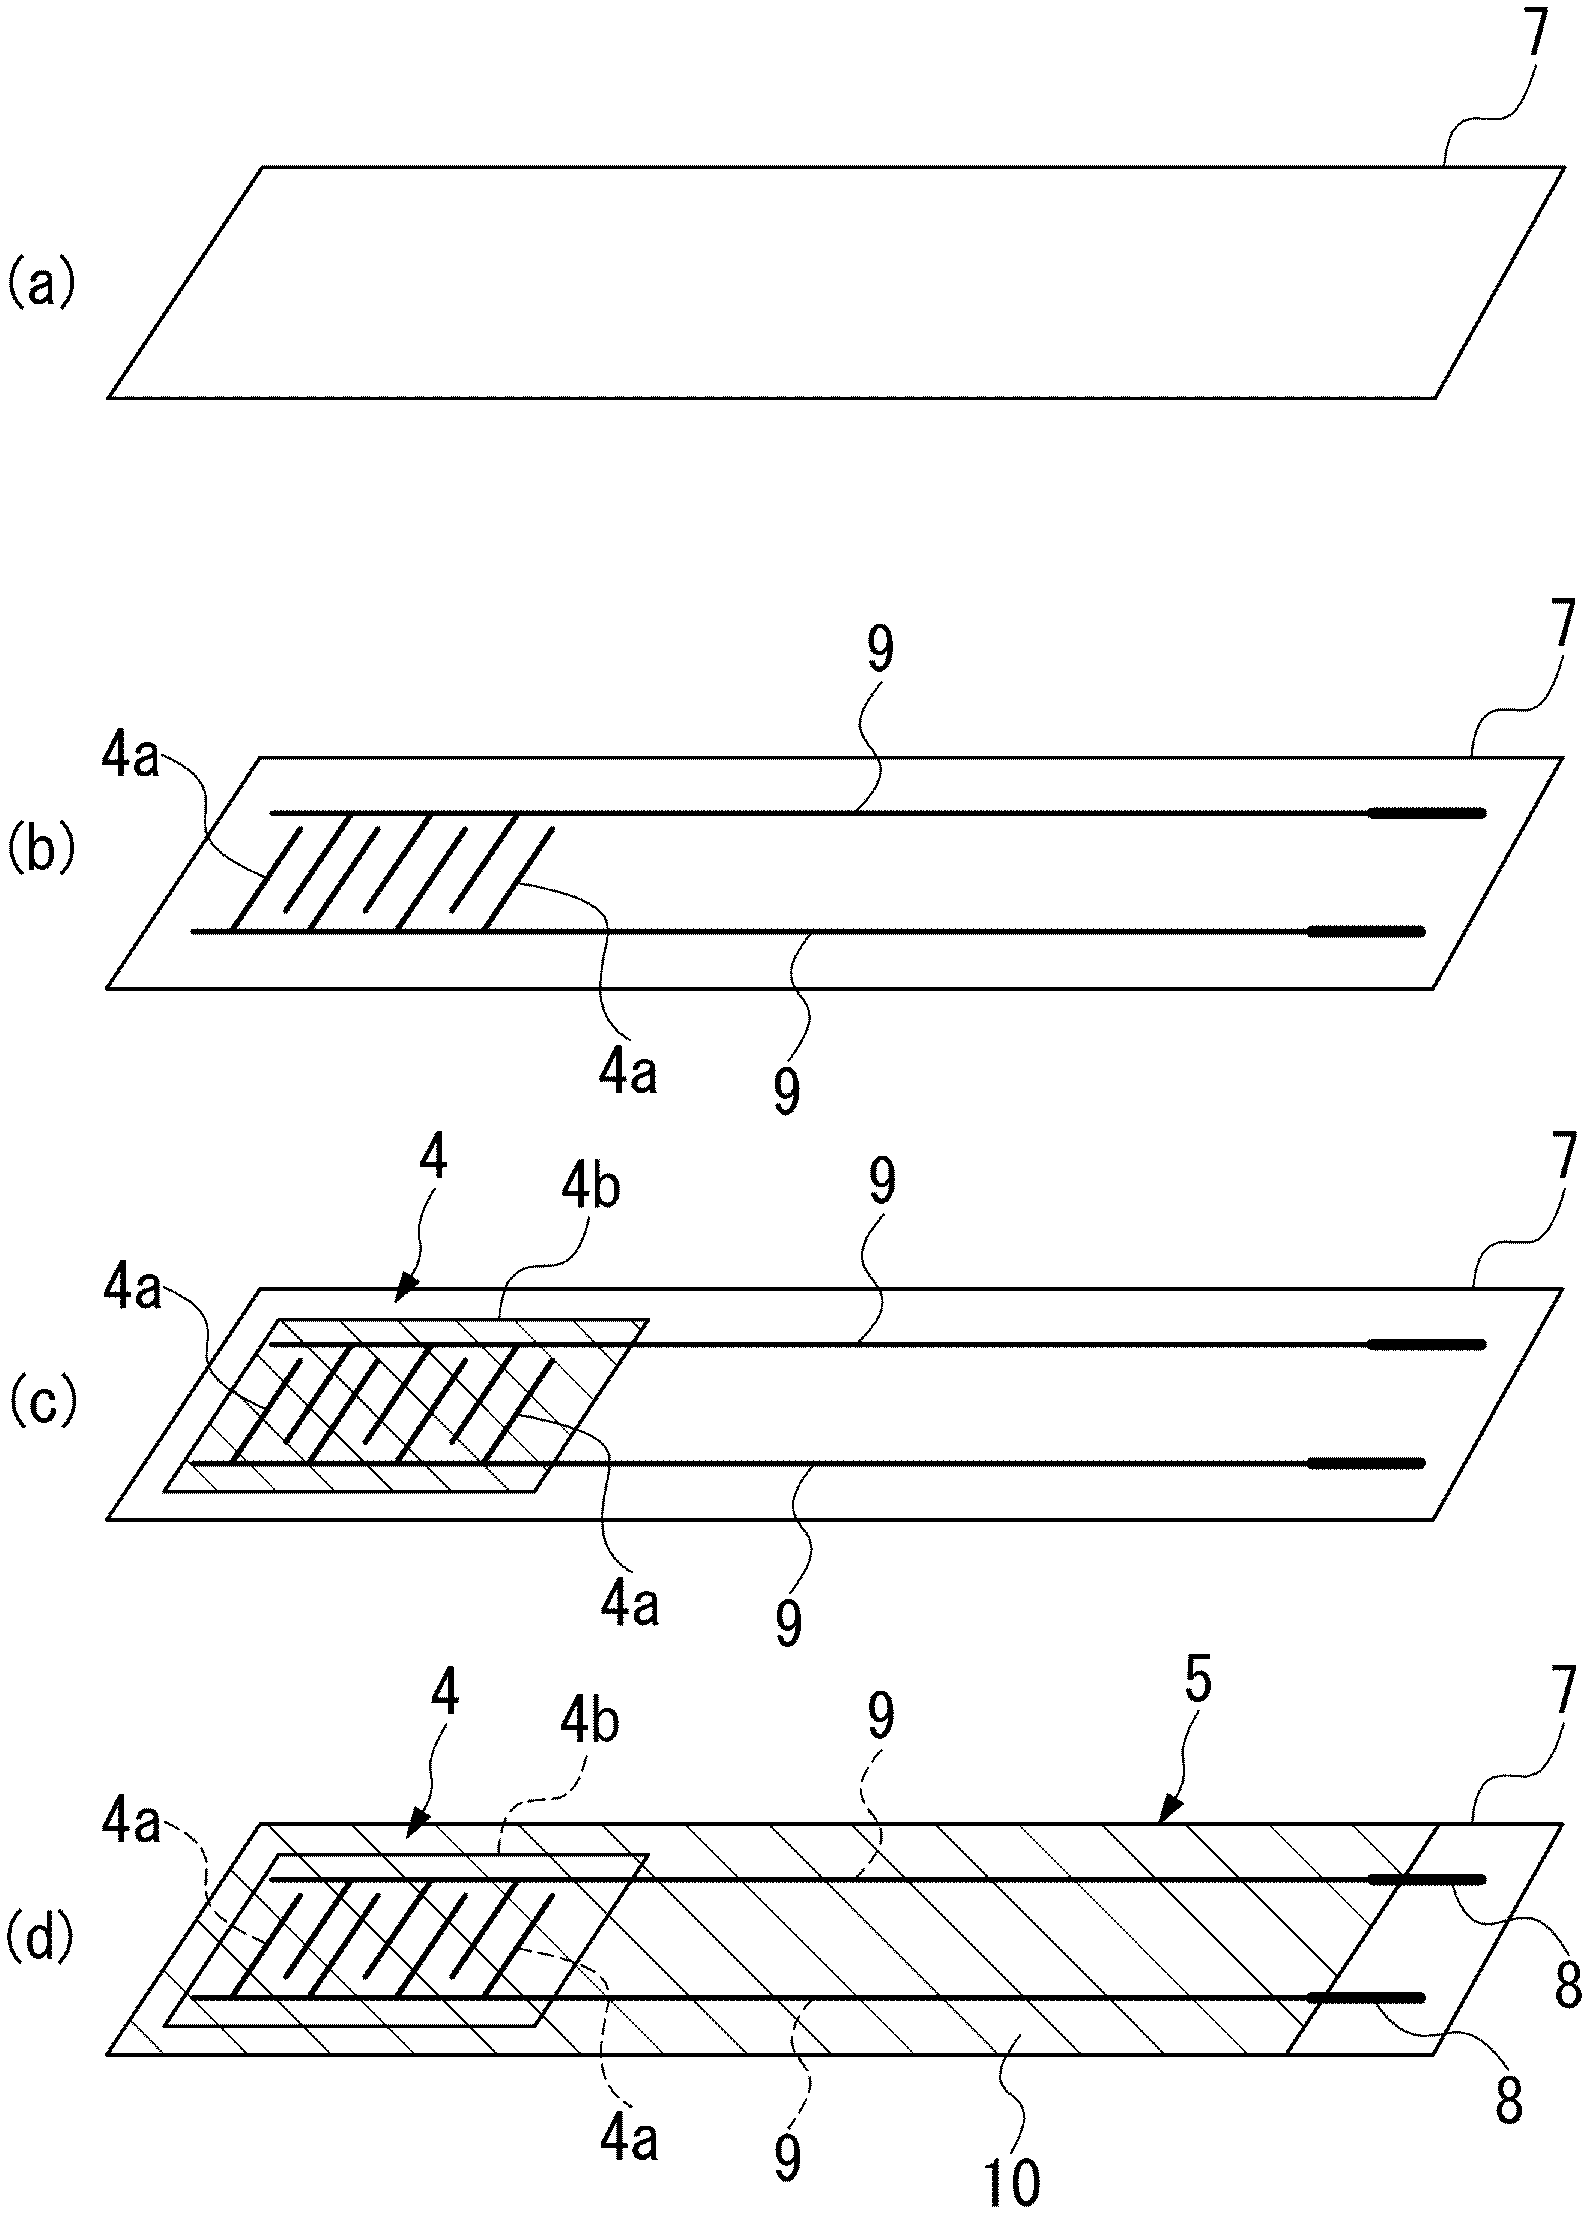 Non-contact power supply device provided with temperature sensor